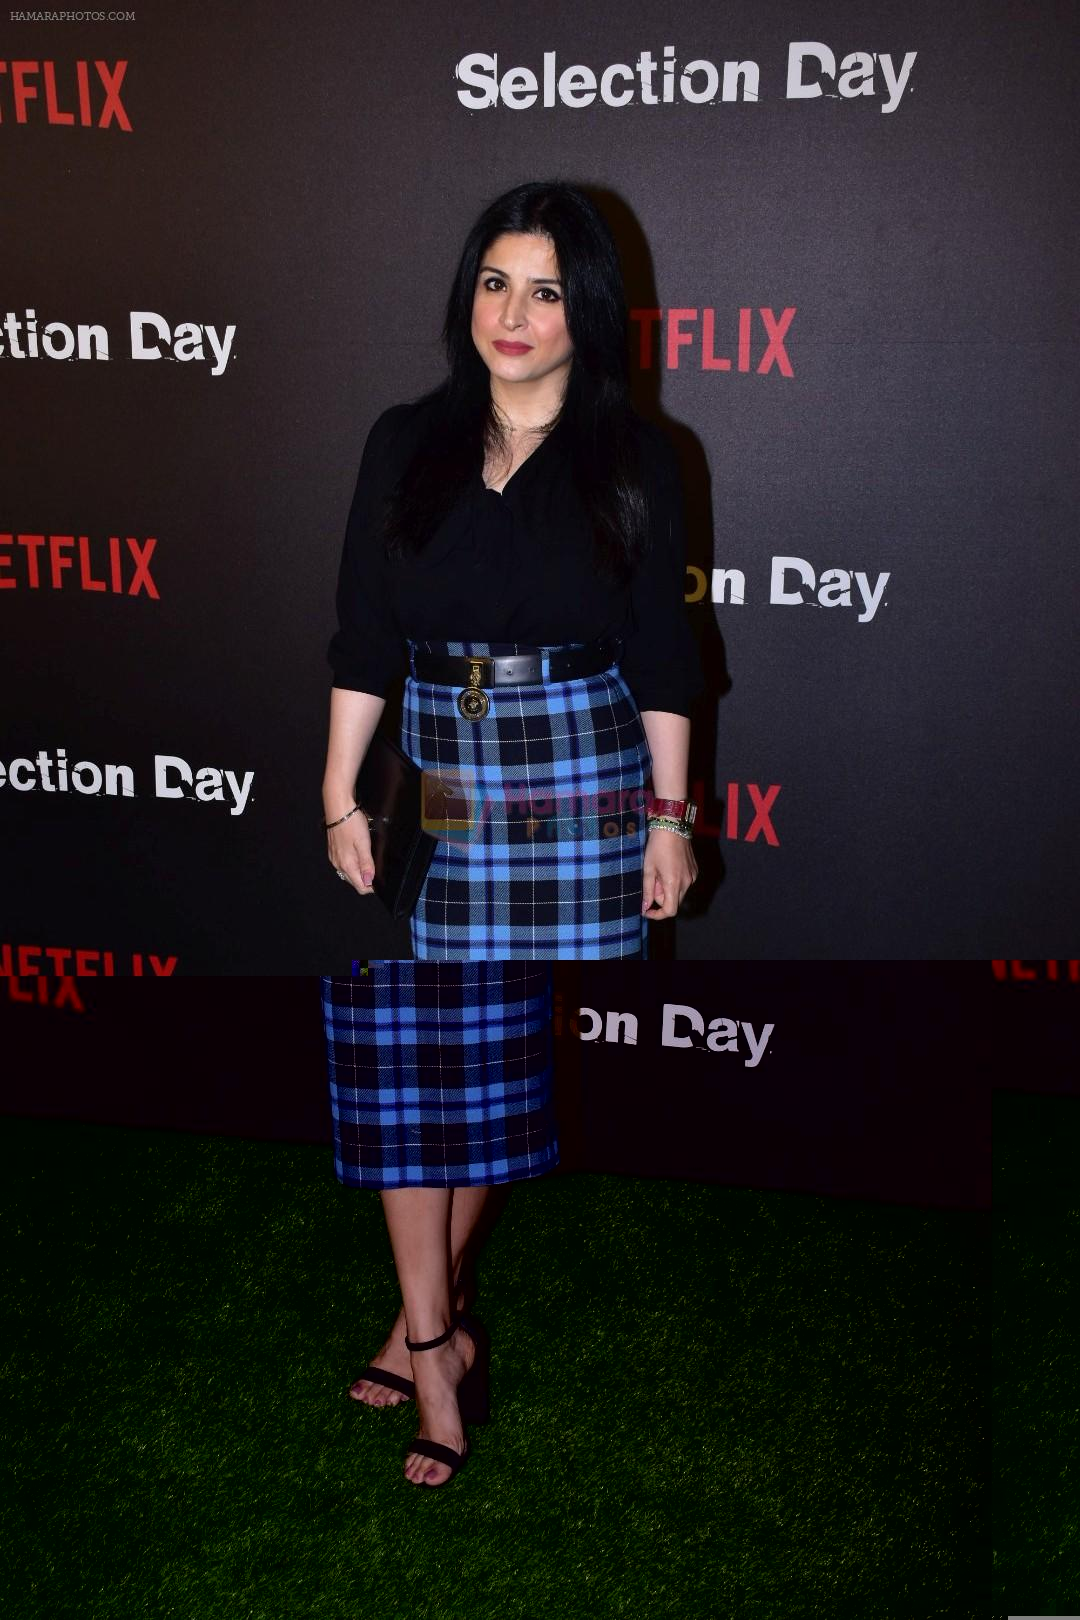 Maheep Kapoor at the Red Carpet of Netfix Upcoming Series Selection Day on 18th Dec 2018